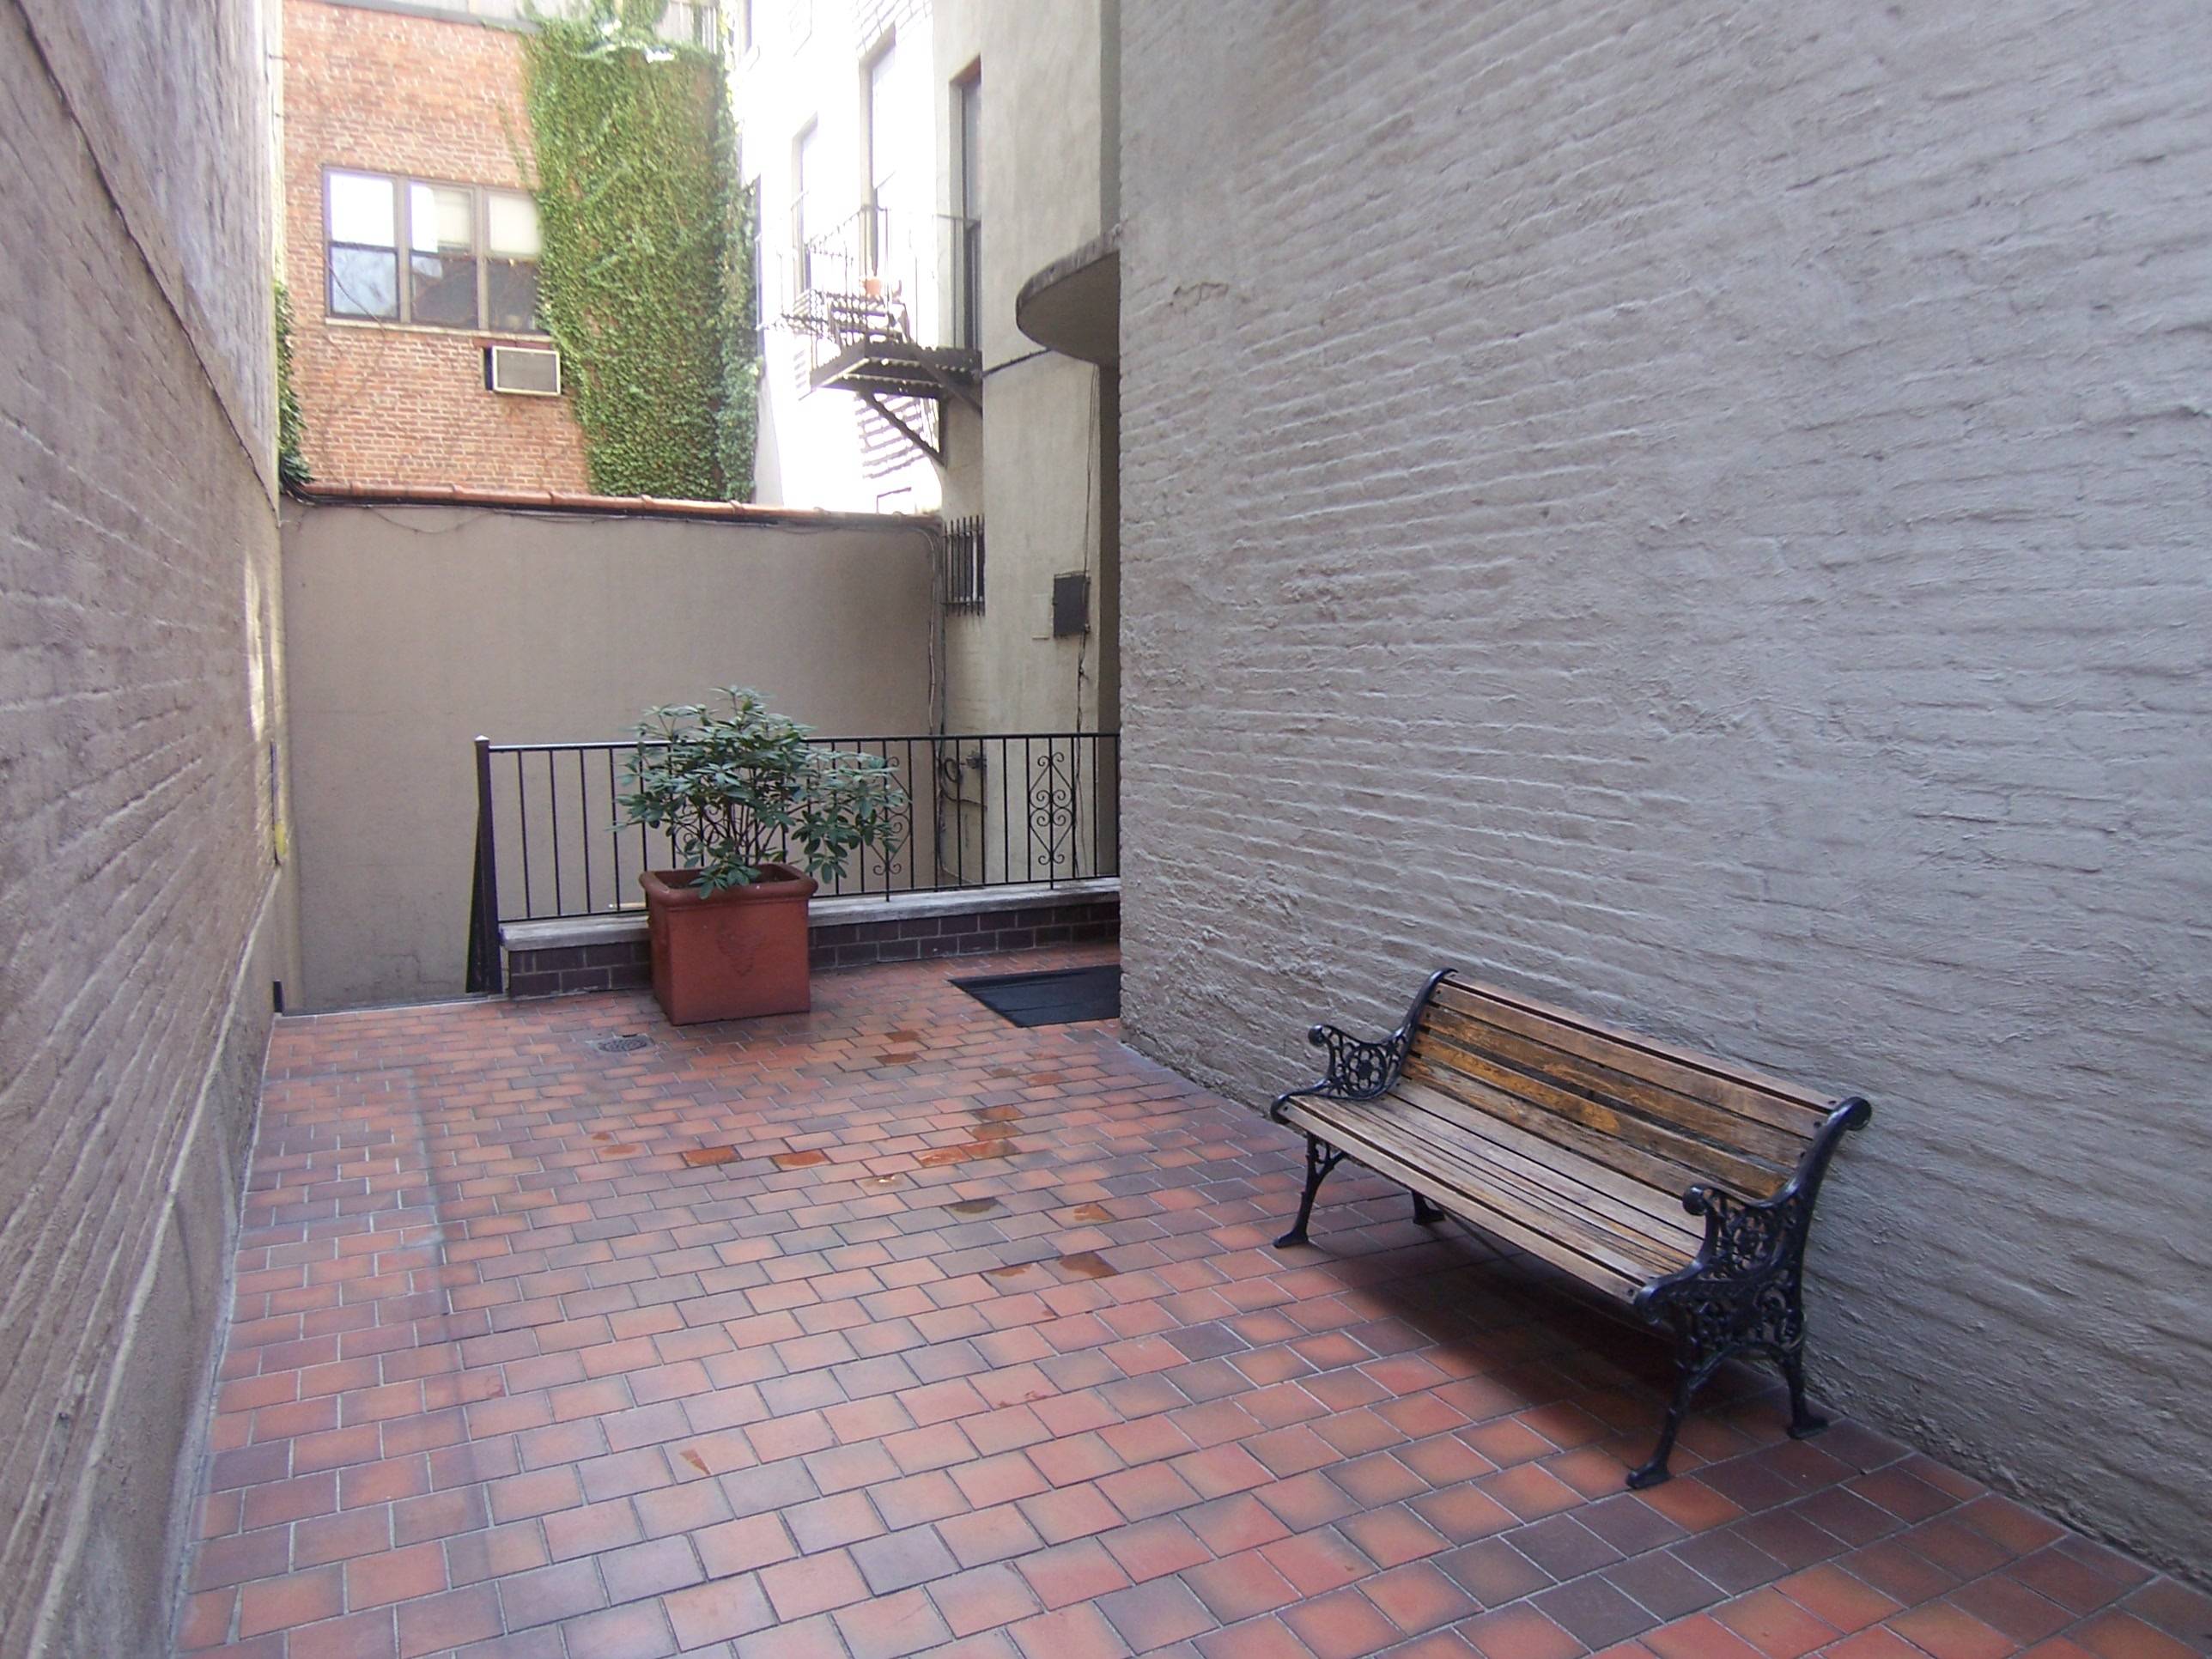 Manhattan Midtown One Bedroom Apartment for Rent in Hells Kitchen - Wont Last Long! Near Theater District!